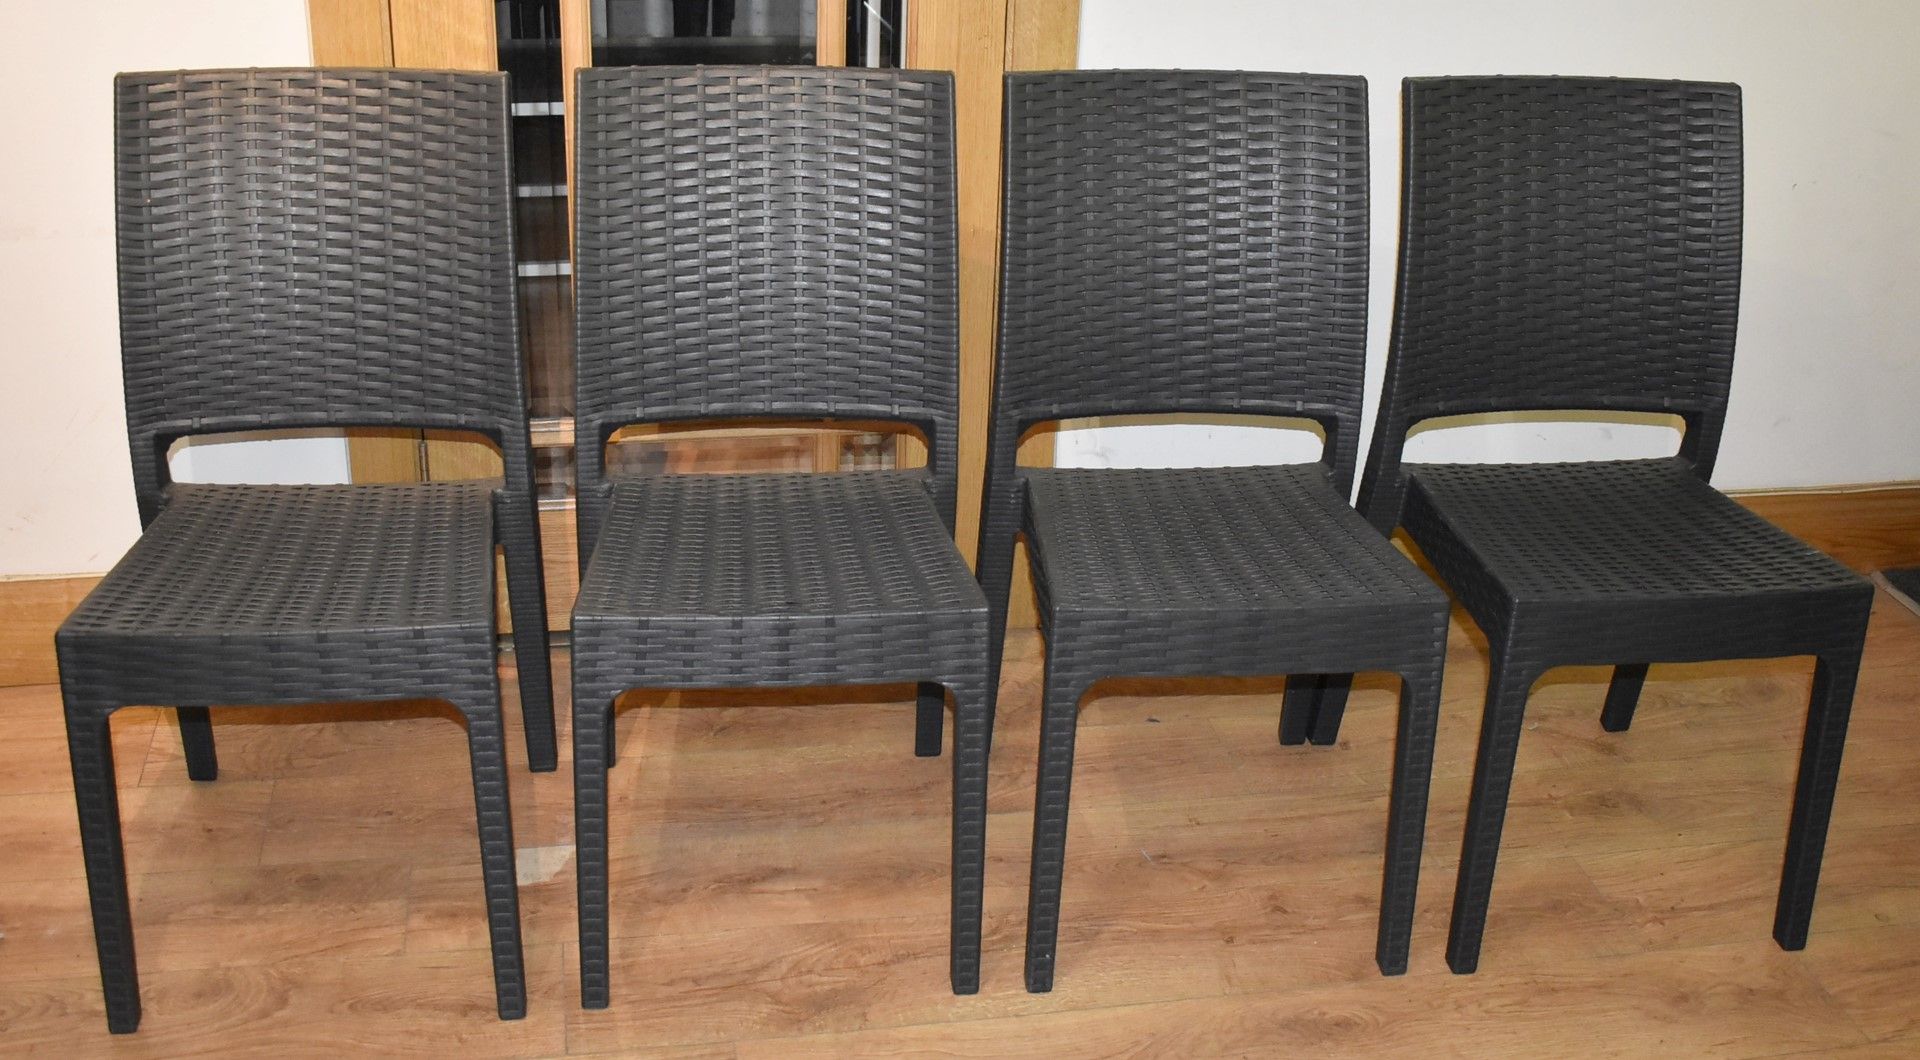 8 x Siesta 'Florida' Rattan Style Garden Chairs In Dark Grey - Suitable For Commercial or Home Use - - Image 3 of 21